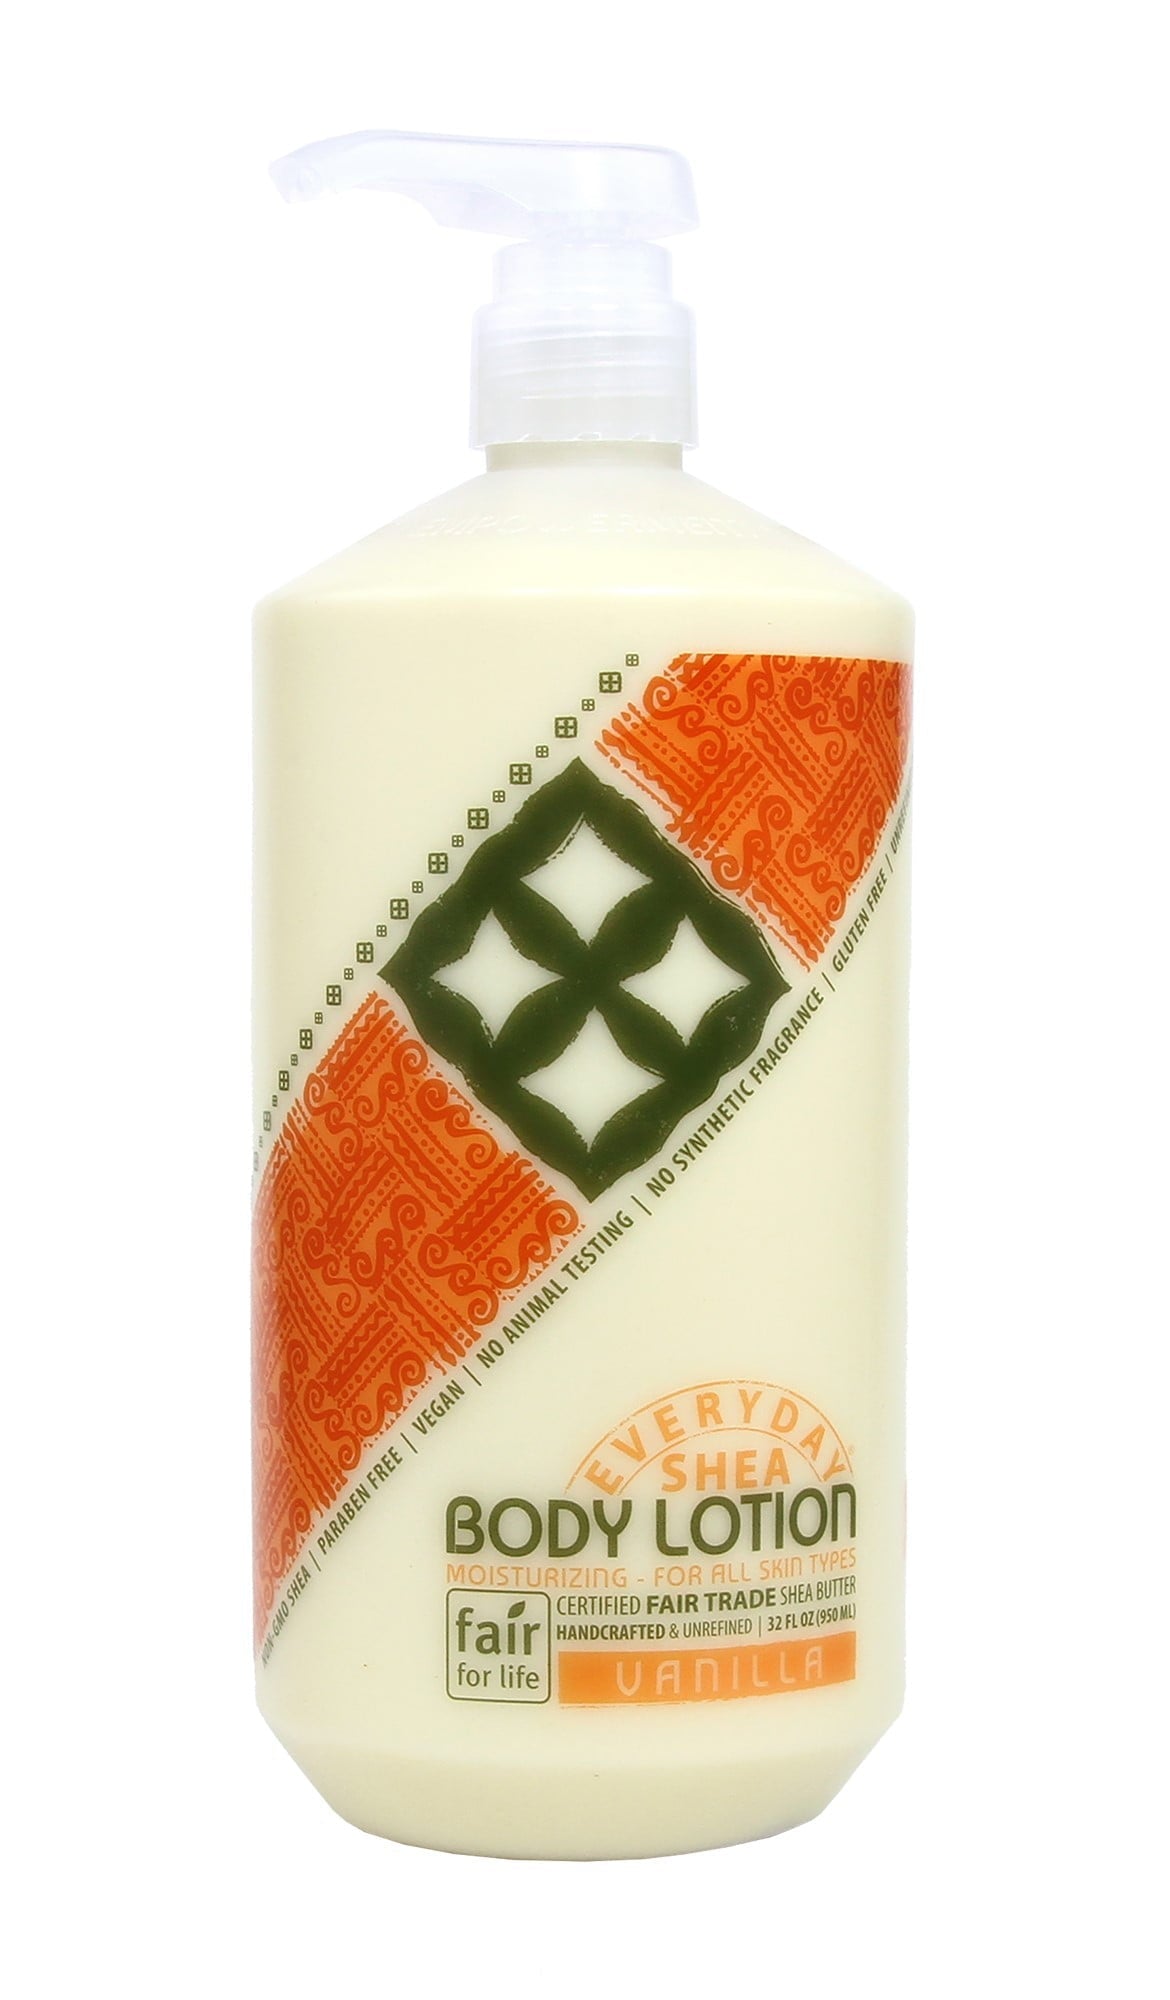 Alaffia Deep Moisture Body Lotion with Shea Butter & Lemongrass Normal to Very Dry Skin Vanilla Scent 32 oz Bottle